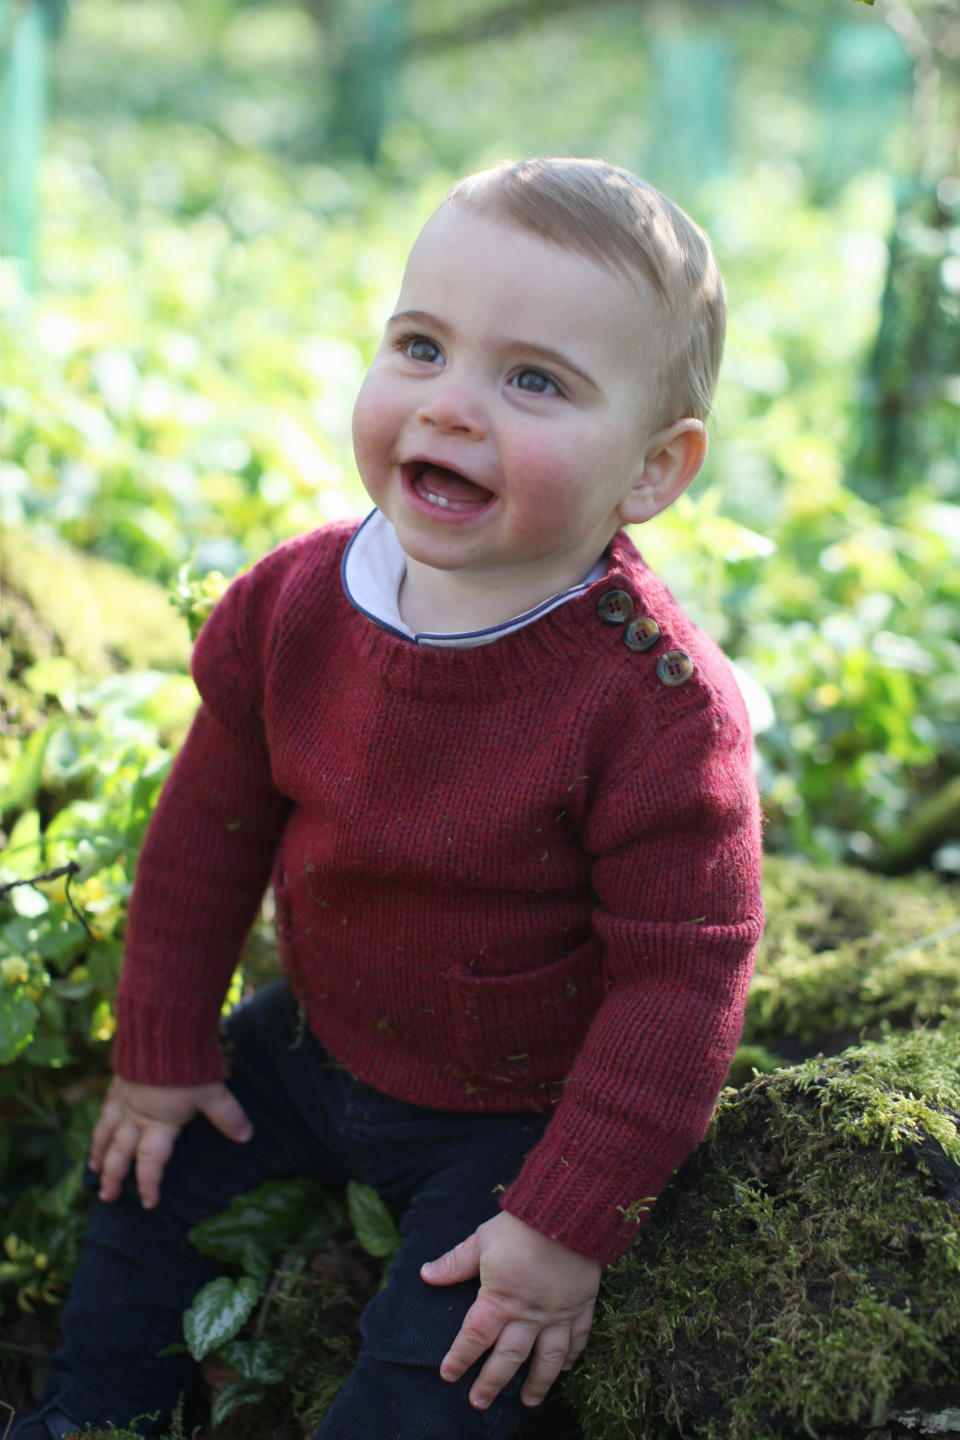 Kensington Palace released three photos of Prince Louis to mark his first birthday. Photo: AAP